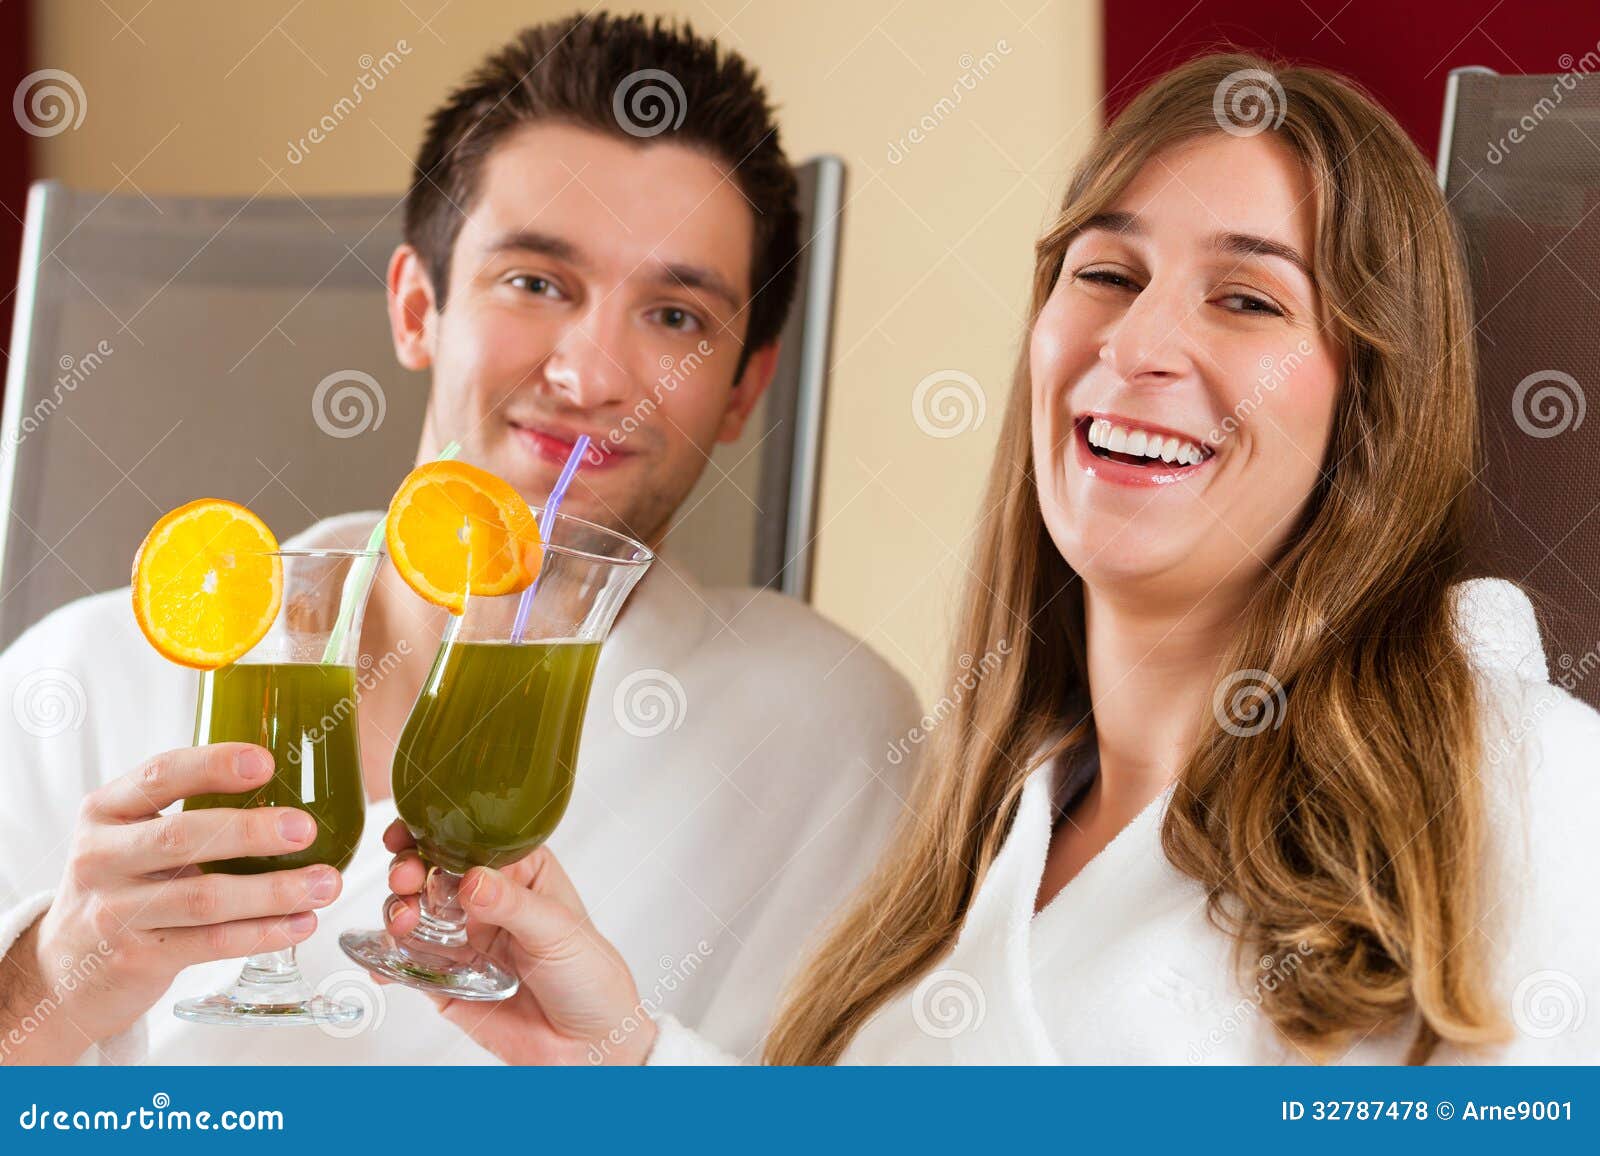 wellness - couple with chlorophyll-shake in spa